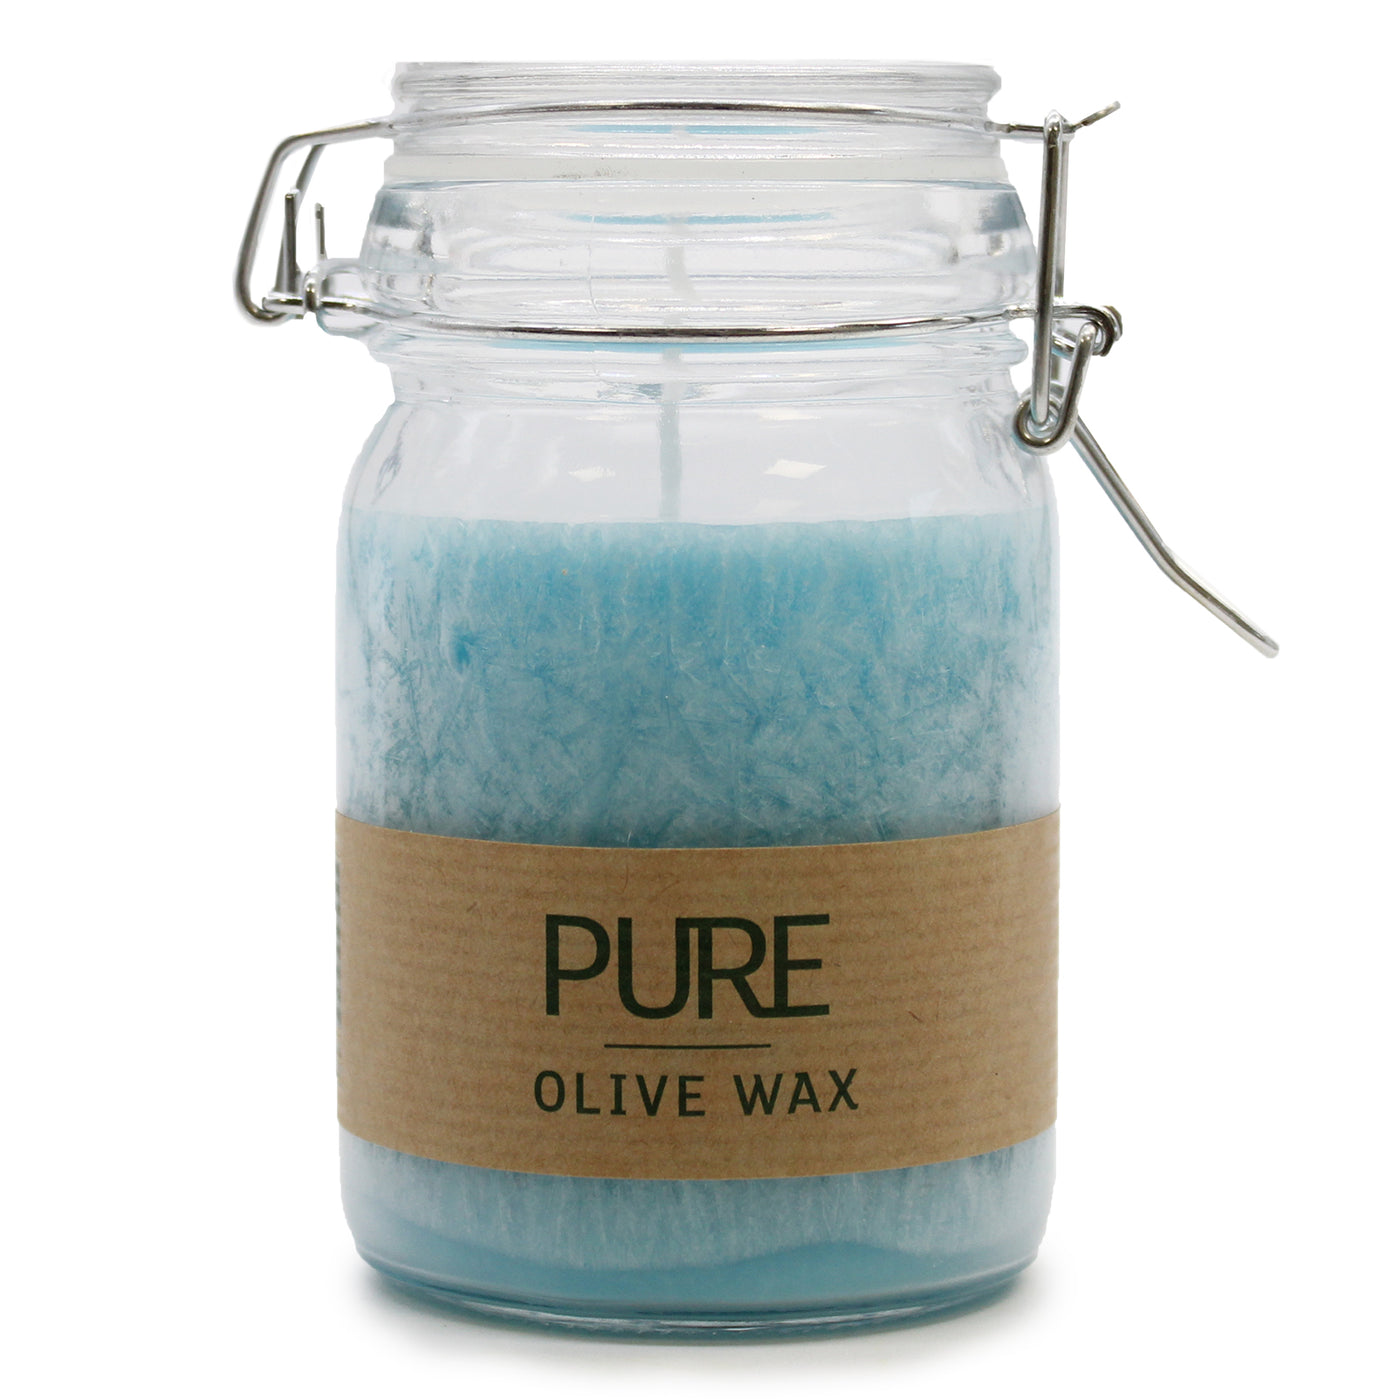 Pure Olive Unfragranced Handmade Turquoise Glass Jar Candle.